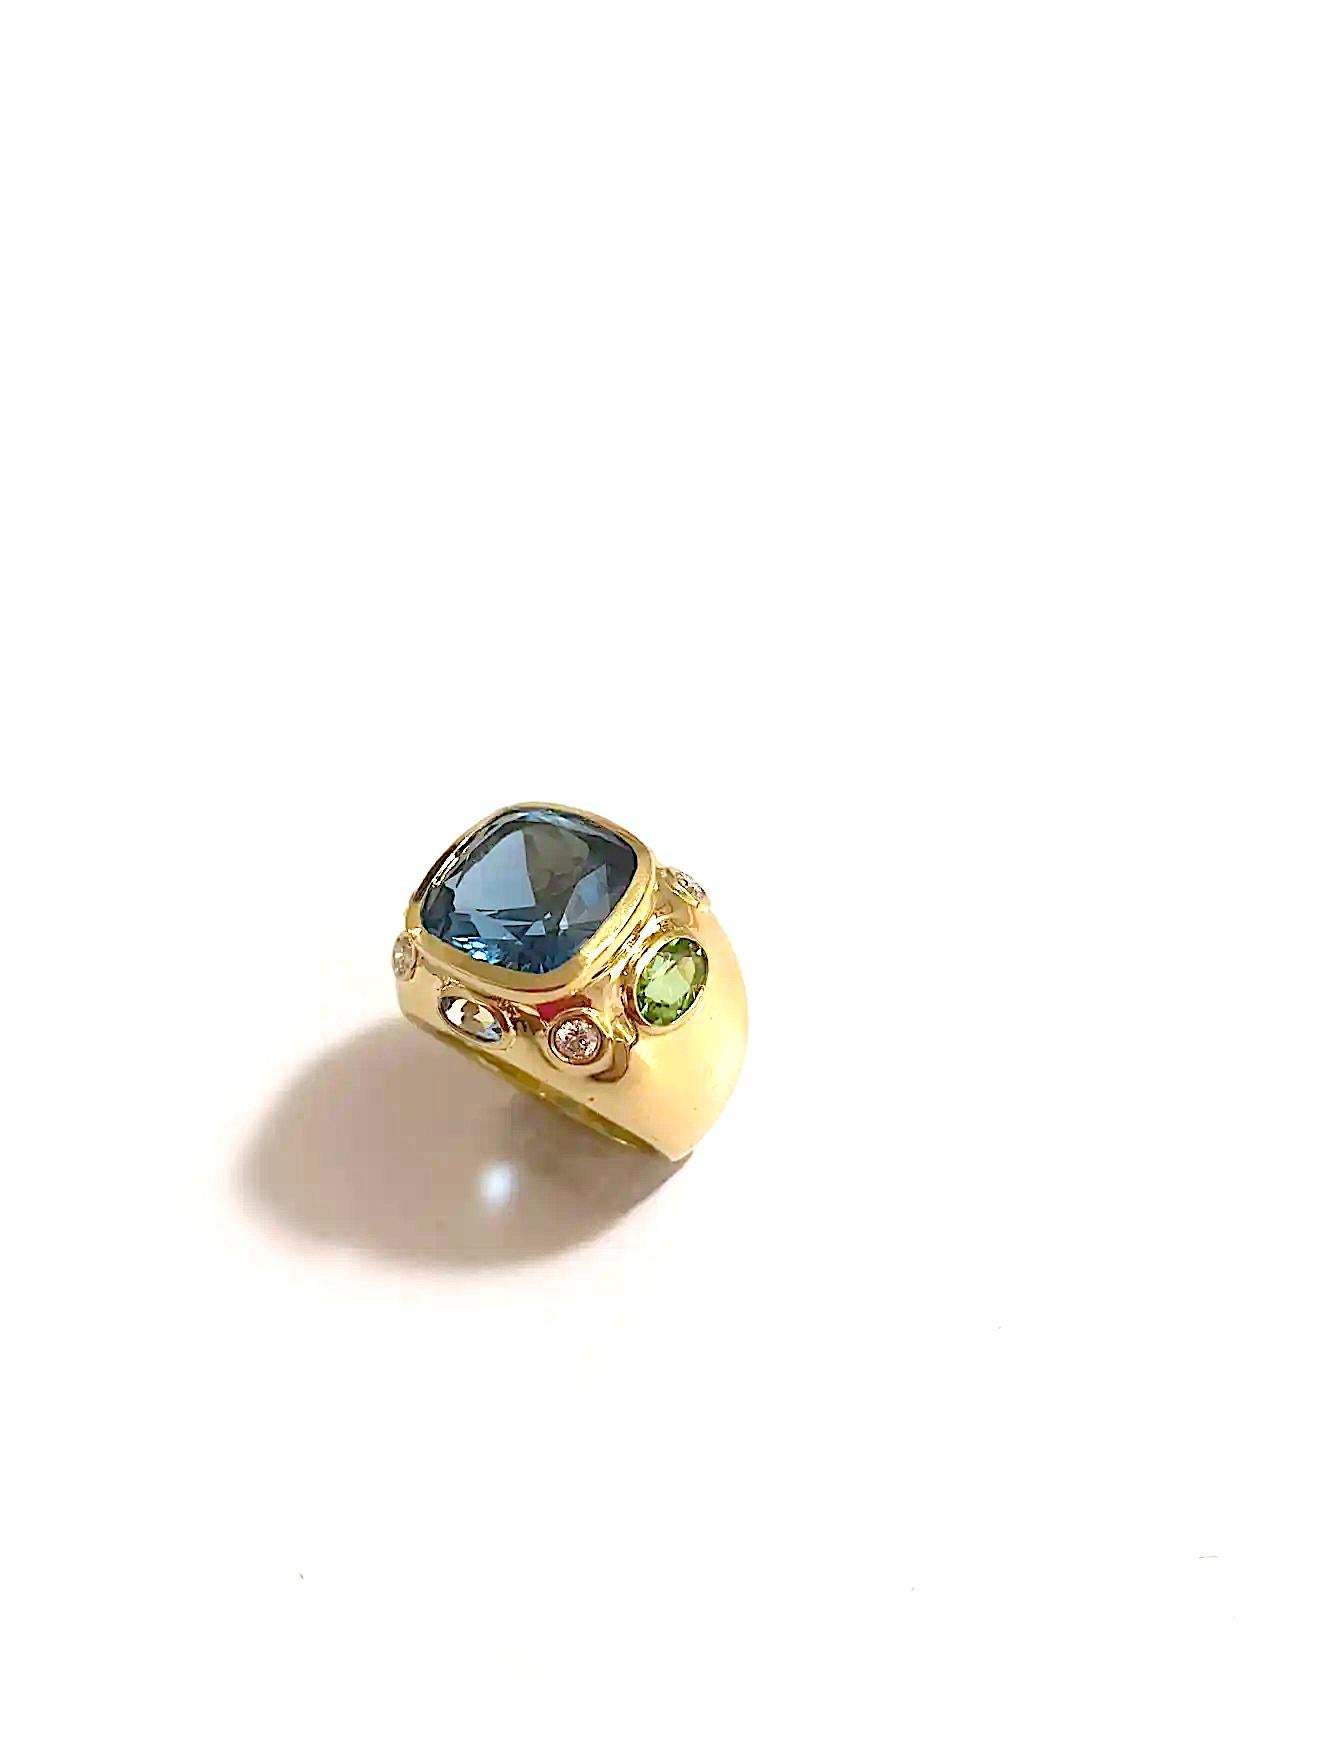 The BONHEUR Ring: 18kt Yellow Gold Domed Ring with faceted Dark Blue Topaz  Cushion cut center stone and faceted ovalPeridot and Pale Blue Topaz  and round Diamonds. 

This ring is available in in any color stone combination.

This ring may be